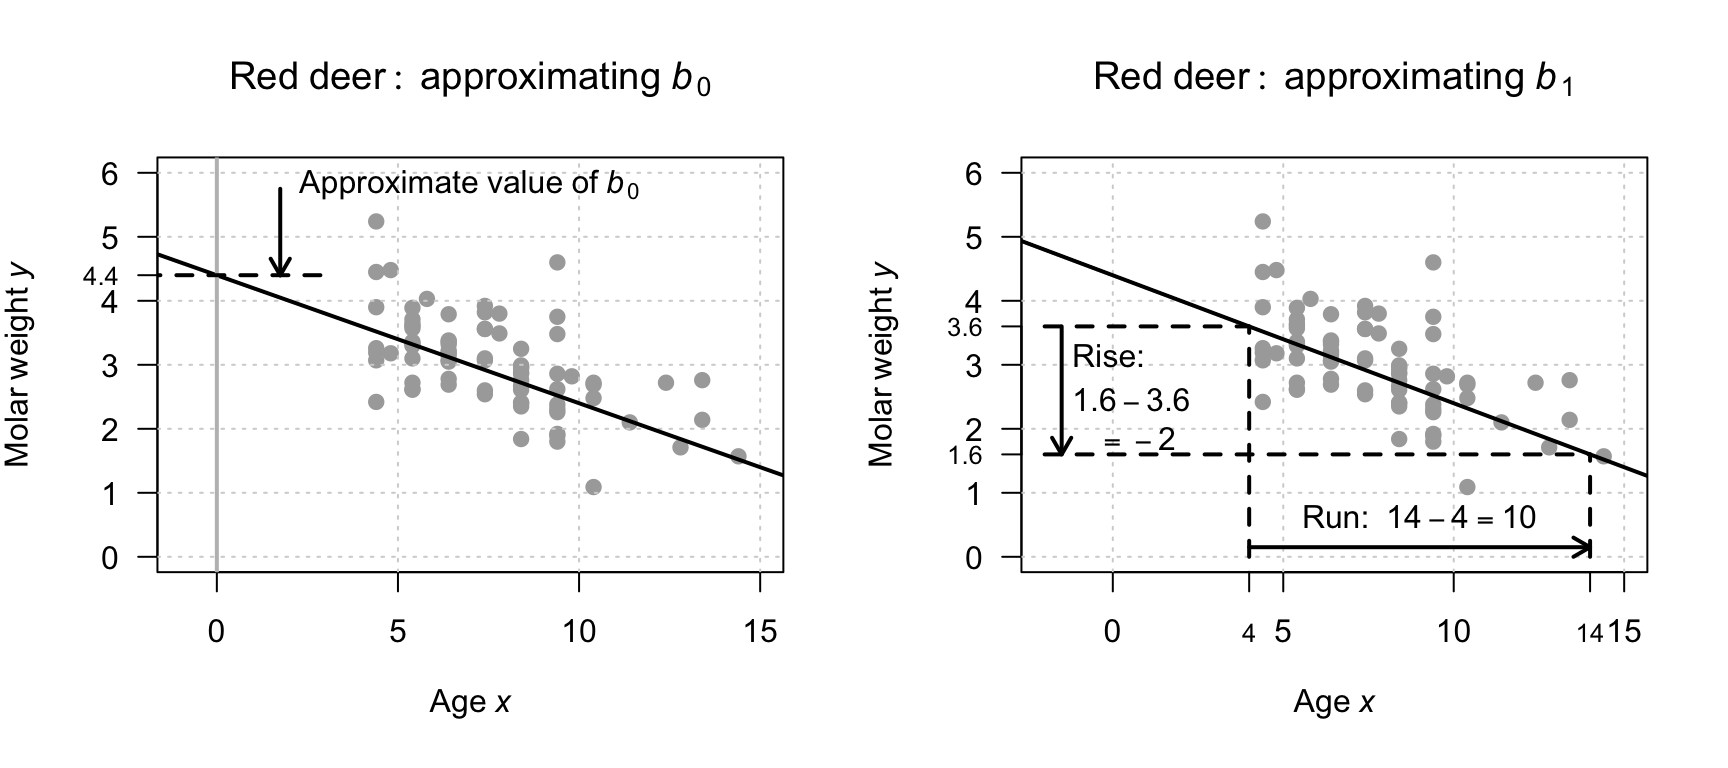 Obtaining rough guesses for the regression equation for the red-deer data. Left: Approximating $b_0$. Right: approximating $b_1$ using rise-over-run.